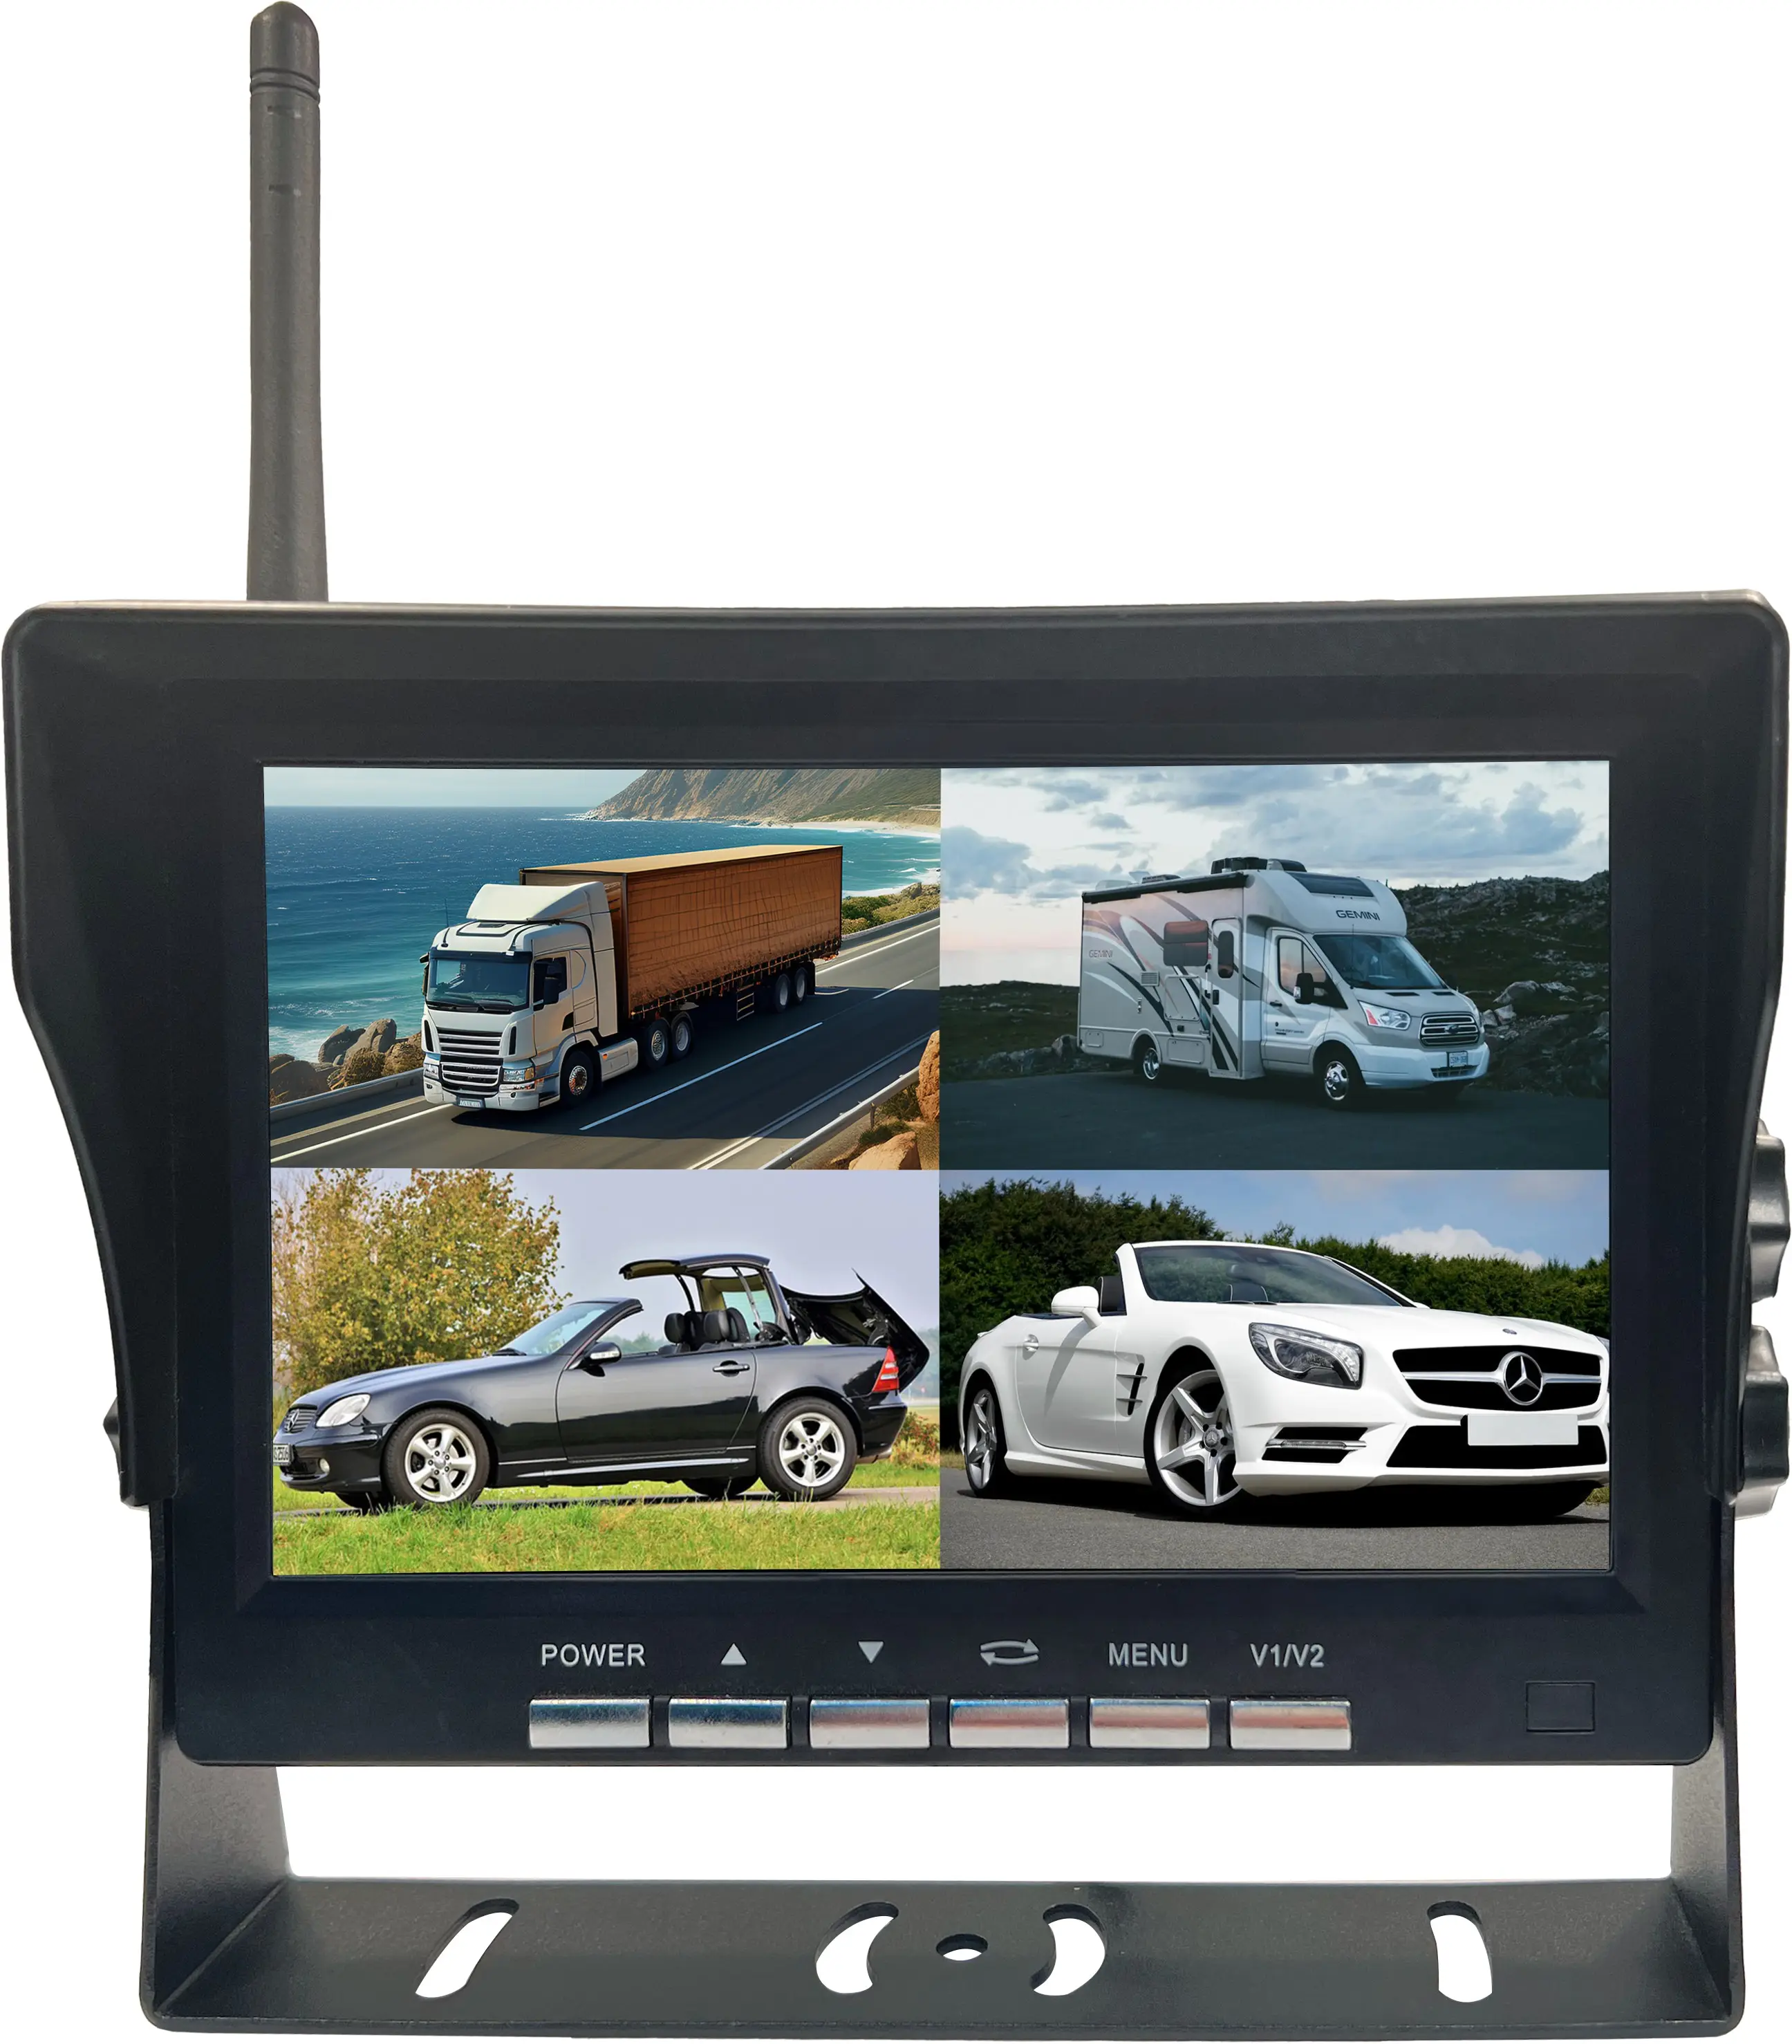 7 inch wireless tft lcd car rearview monitor supports 8 languages Dash Cam Dvr Recorder Dual Front Reverse Backup